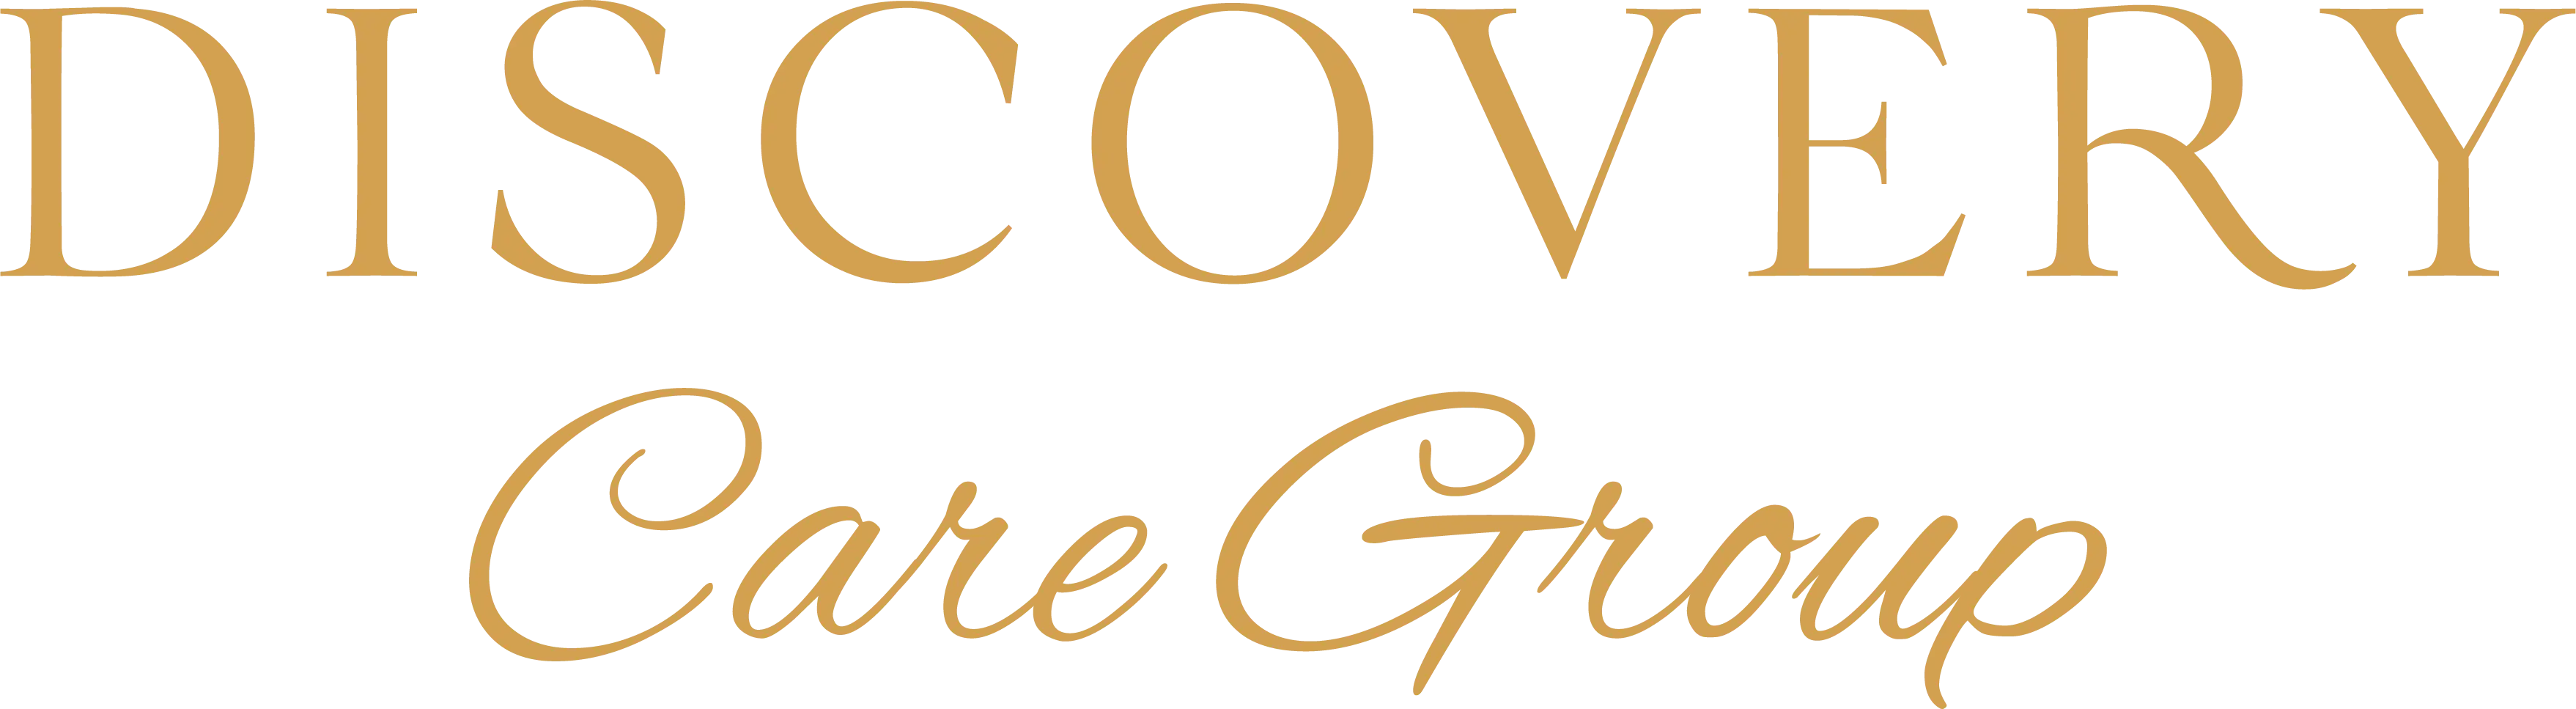 Discovery Care Group